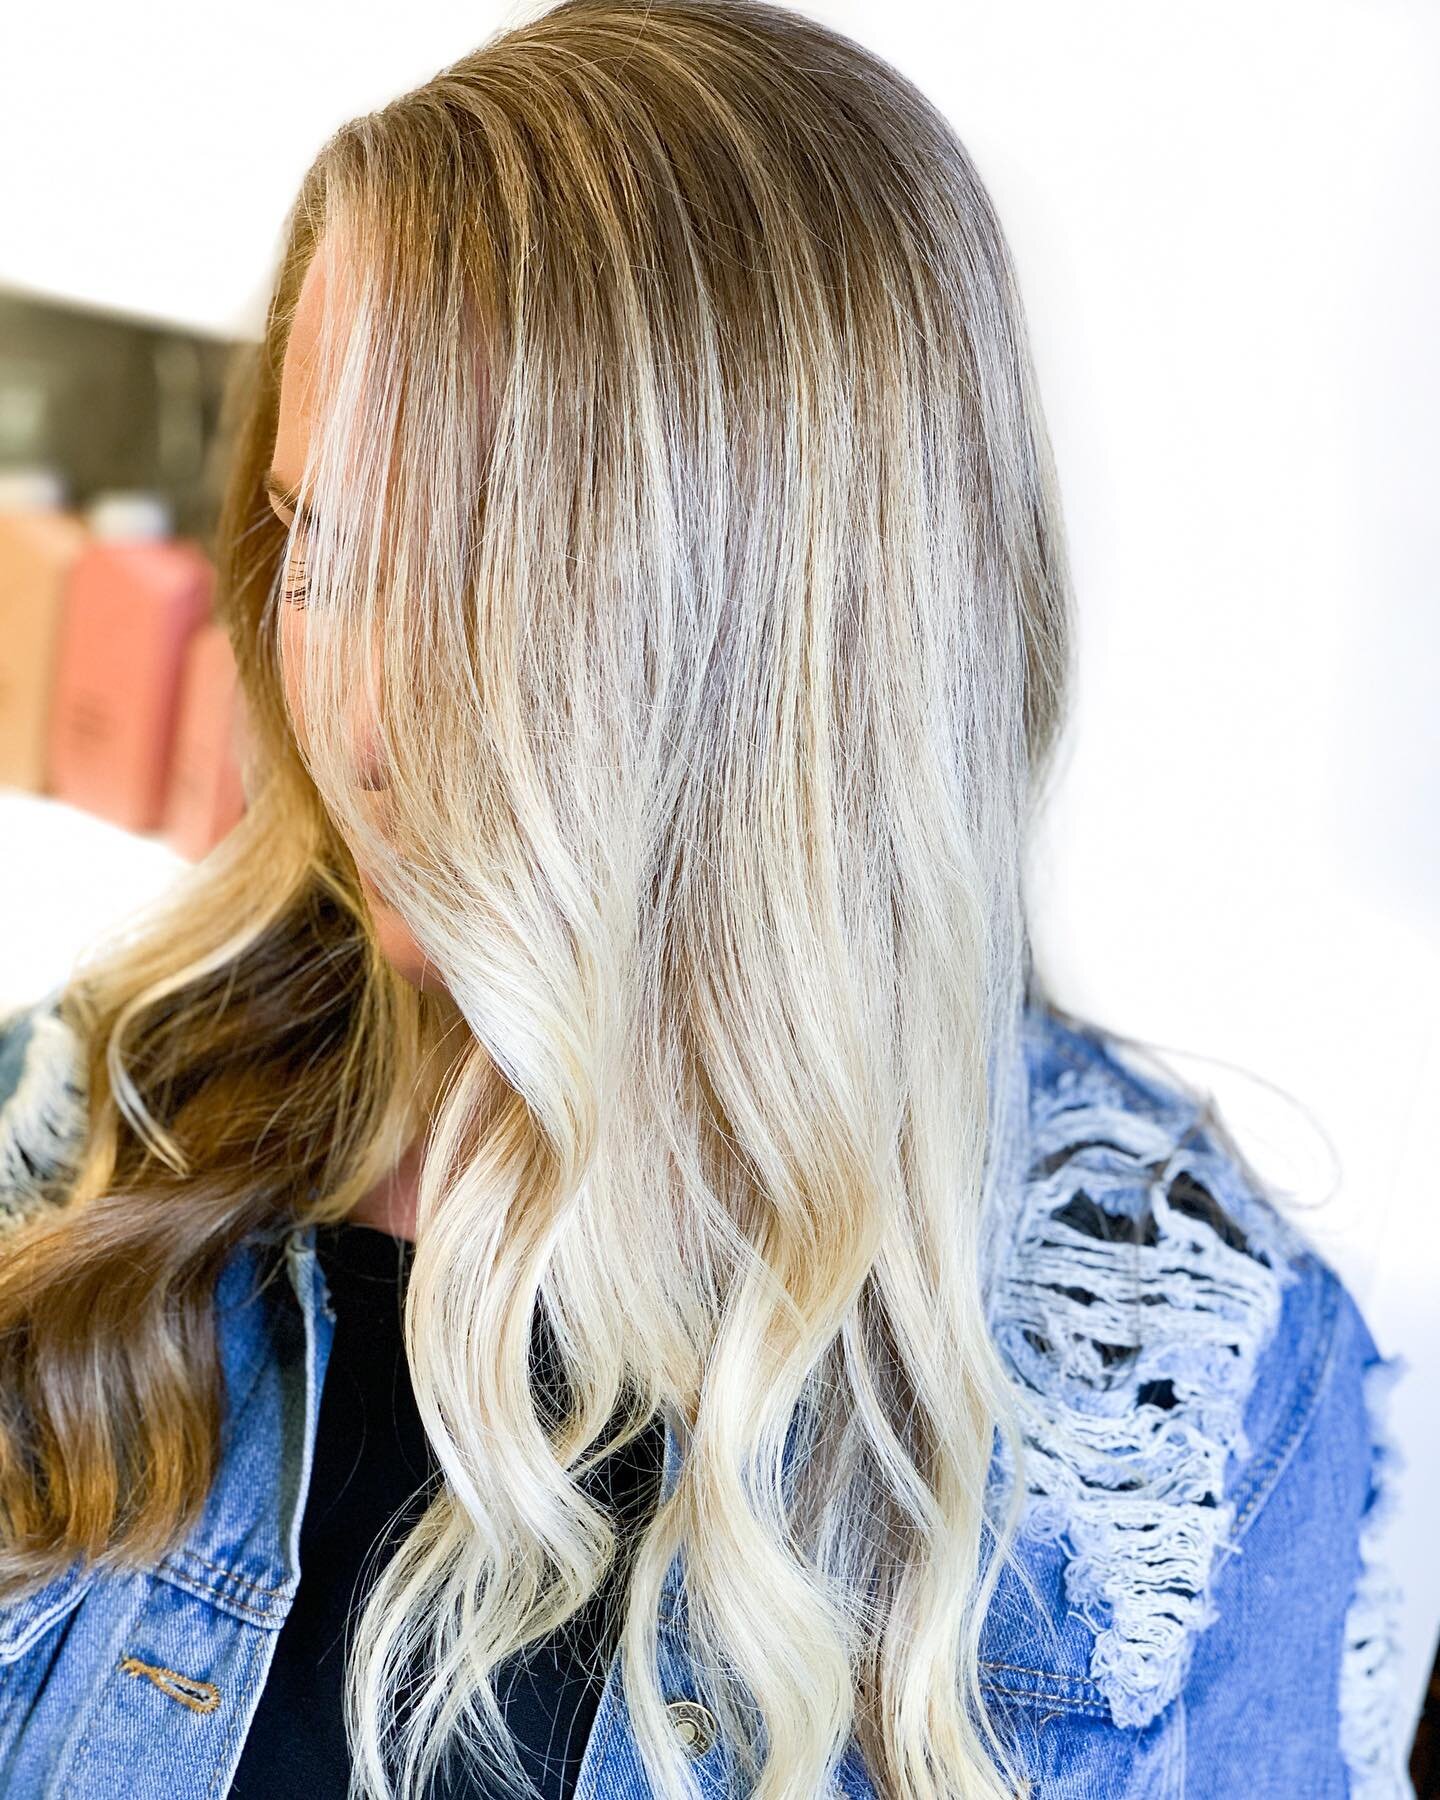 It&rsquo;s the balayage for me ✨

#seattle #tacoma #sumner #puyallup #gigharbor#hairgoals #hairdressermagic #salonlife #hairtrends #hairdresser #haireducation #hairoftheday #tacomabalayage #licensedtocreate #tacomahairstylist 
#behindthechair #hairbr